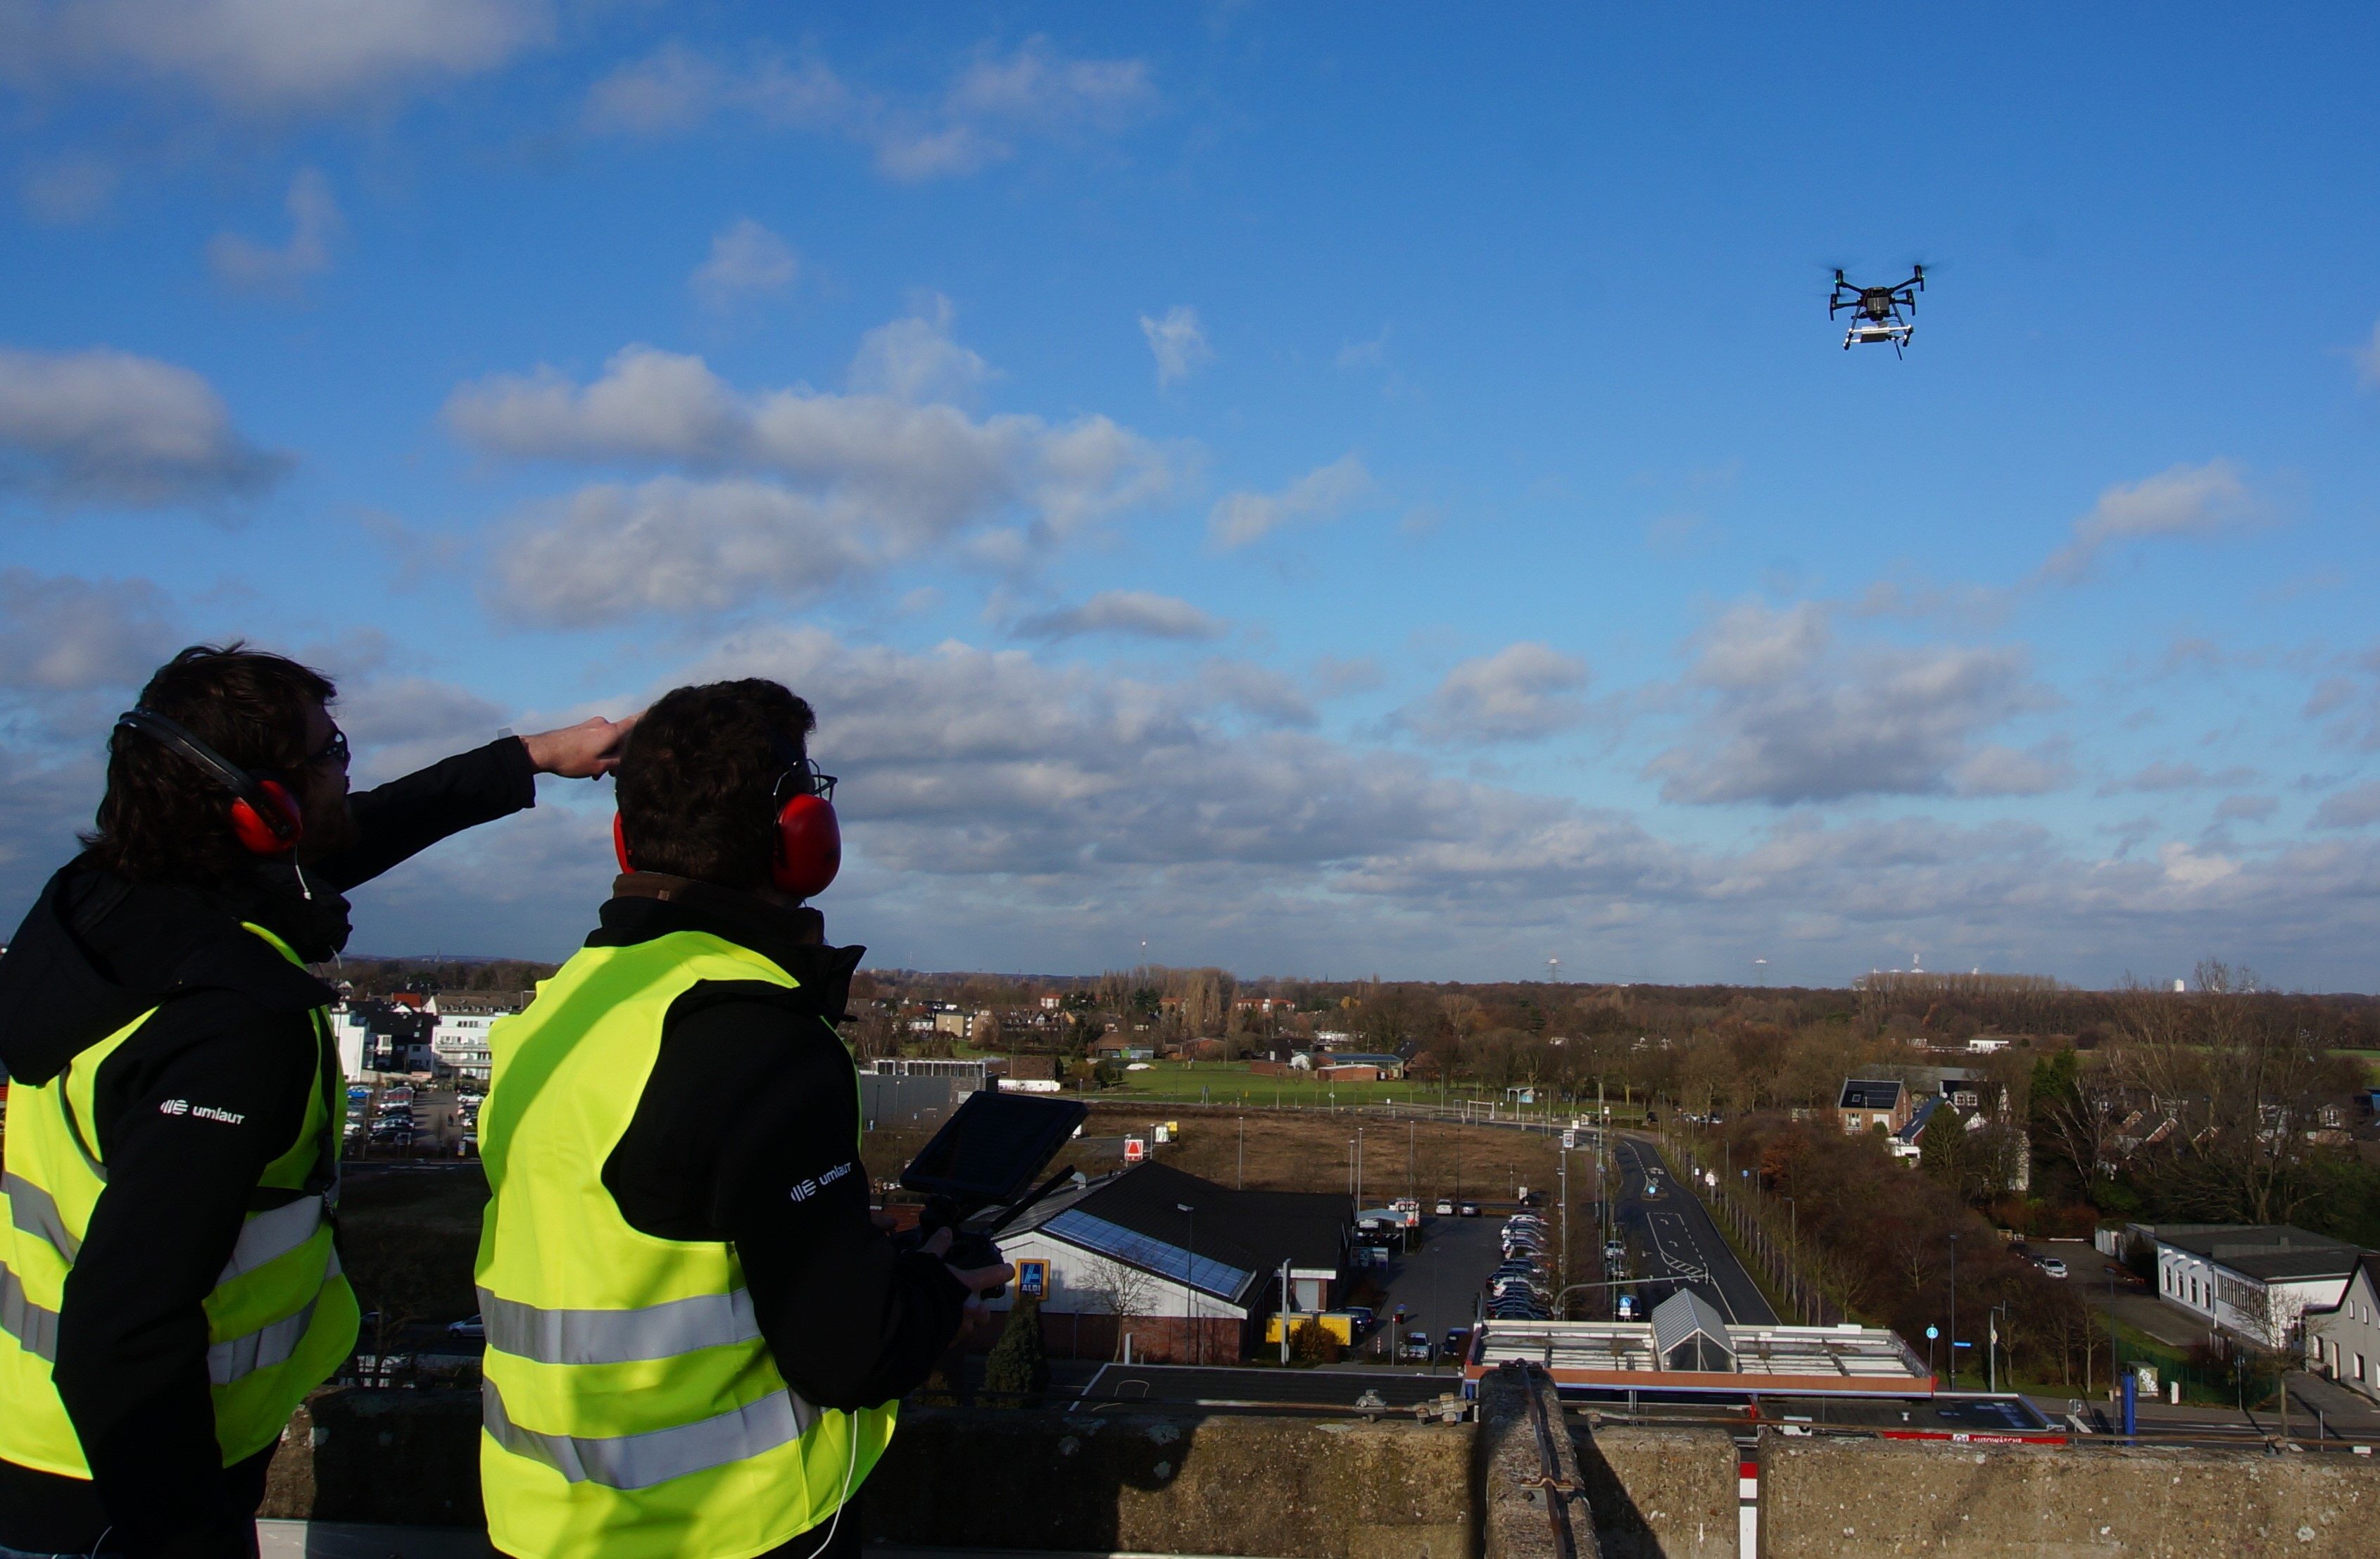 umlaut employees measure the quality of the mobile network in low-level airspace during test flights with a drone.